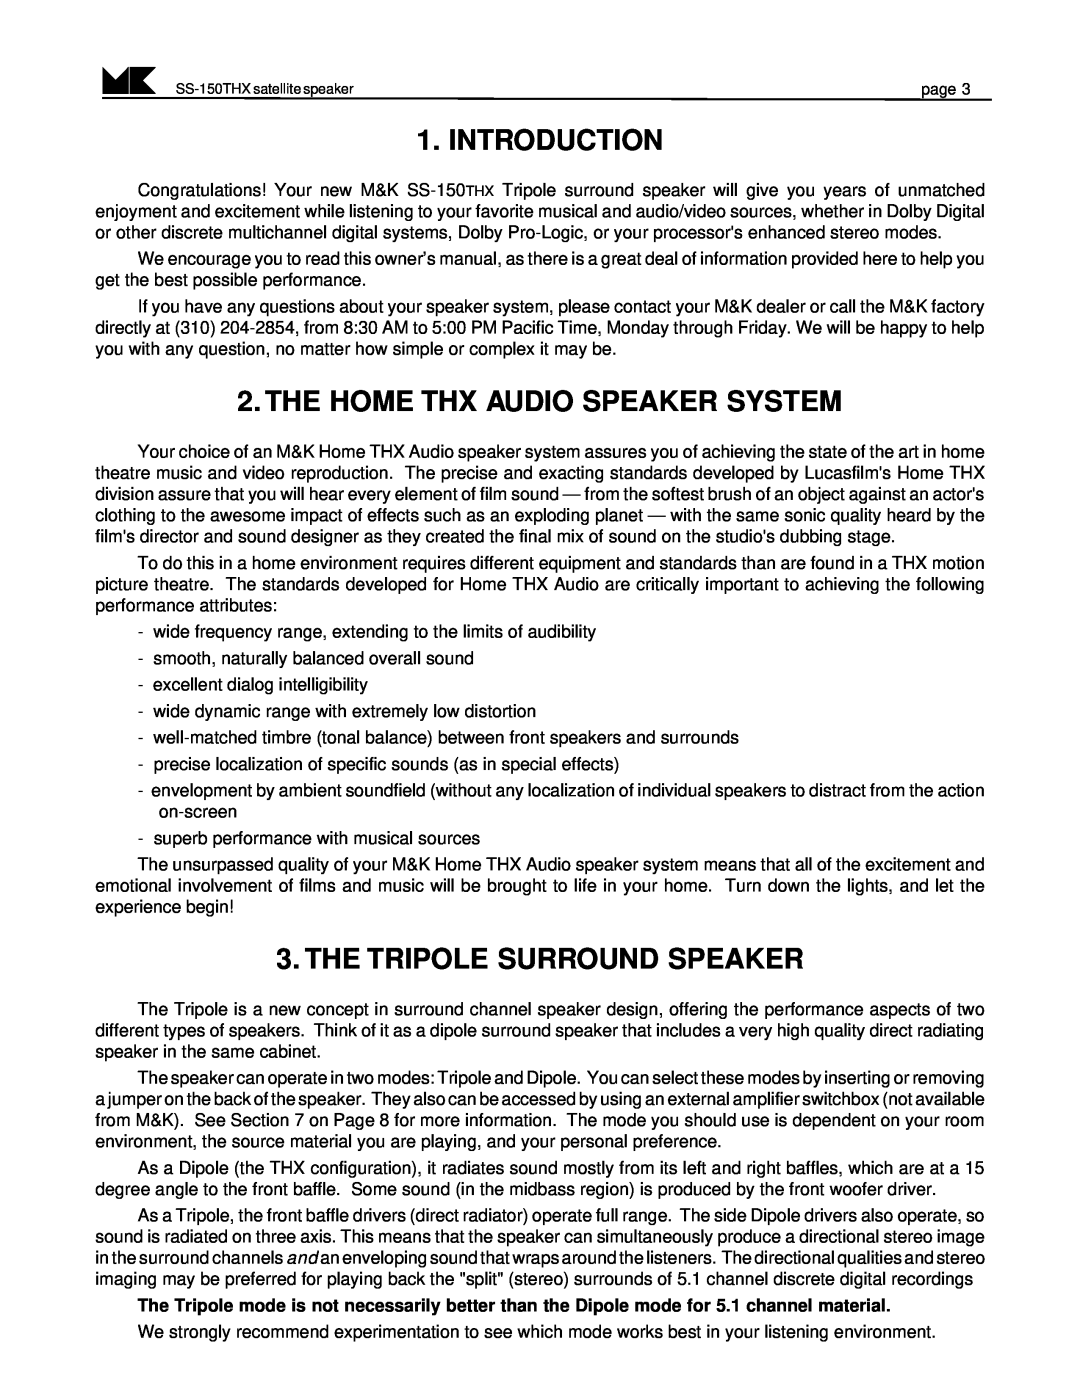 MK Sound SS-150THX operation manual Introduction, The Home Thx Audio Speaker System, The Tripole Surround Speaker 